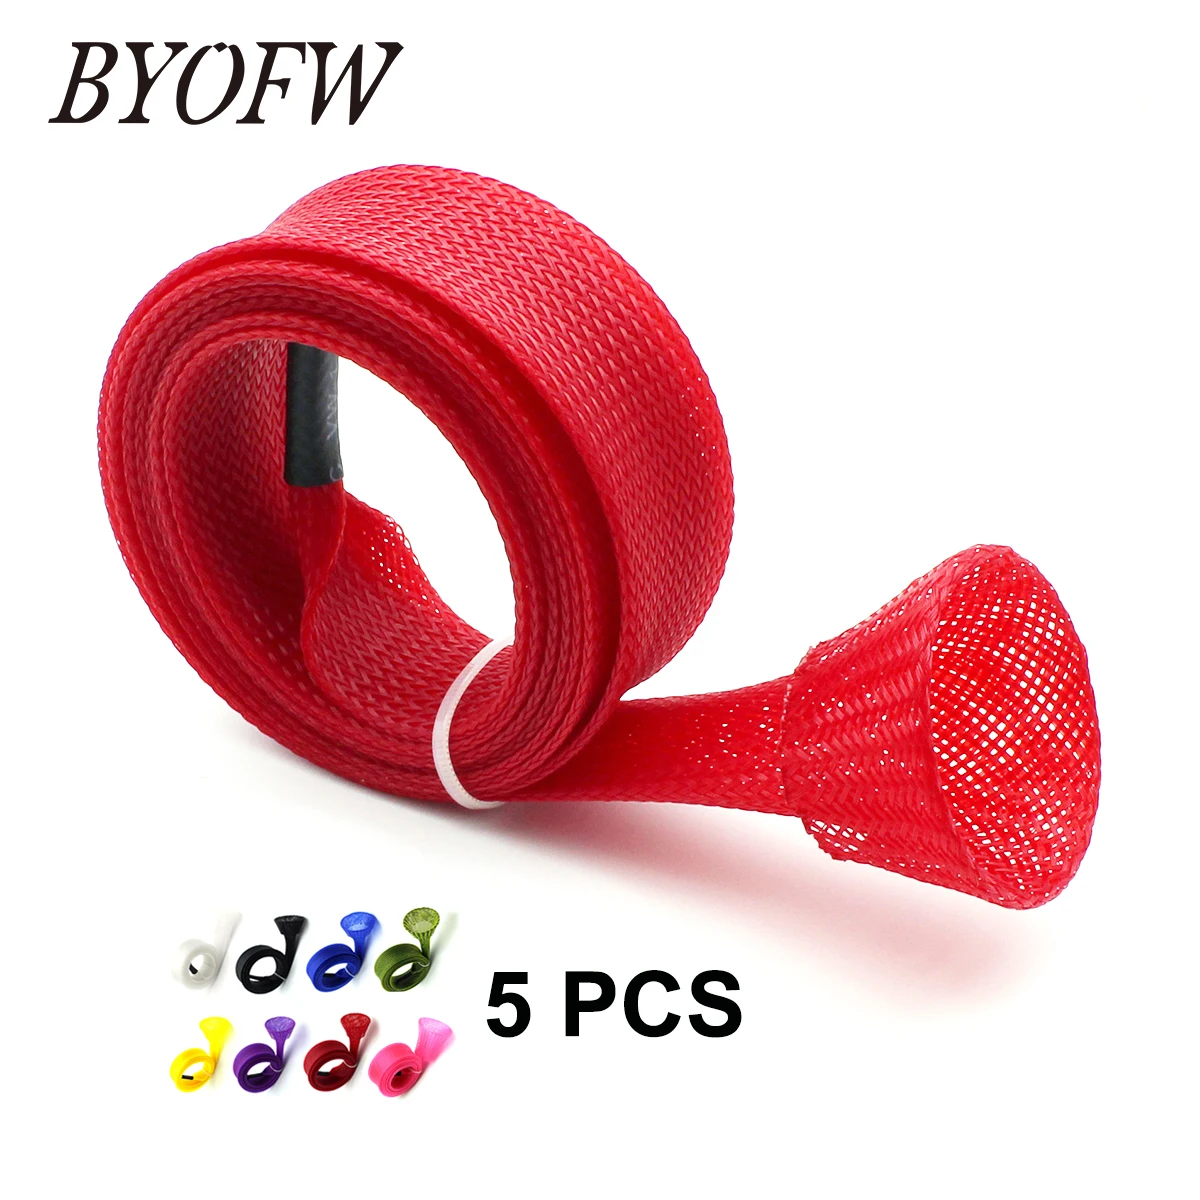 

BYOFW 5 PCs 30 Width Fishing Rod Building Sleeve Sock Cover Tangle Free Multi-Color Pole Protector Flexible Casting Replacement